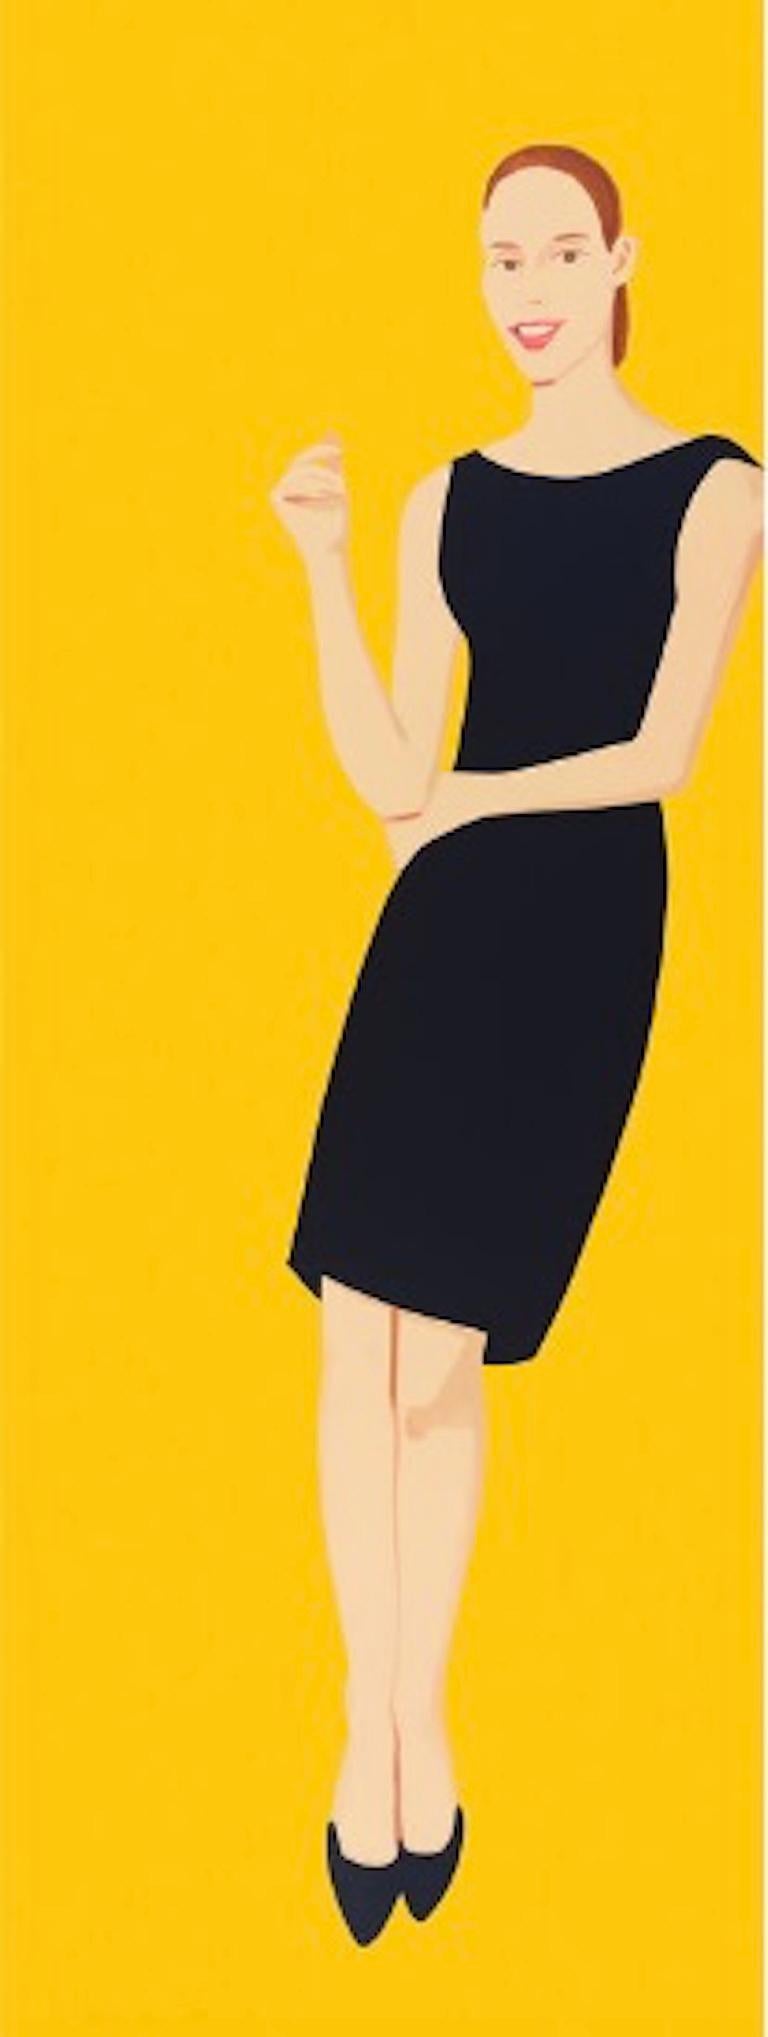 Alex Katz
Screenprint
Framed, ready to hang

Alex Katz

Alex Katz (born July 24, 1927) is an American figurative artist known for his paintings, sculptures, and prints. He is represented by numerous galleries internationally.

Alex Katz was born to